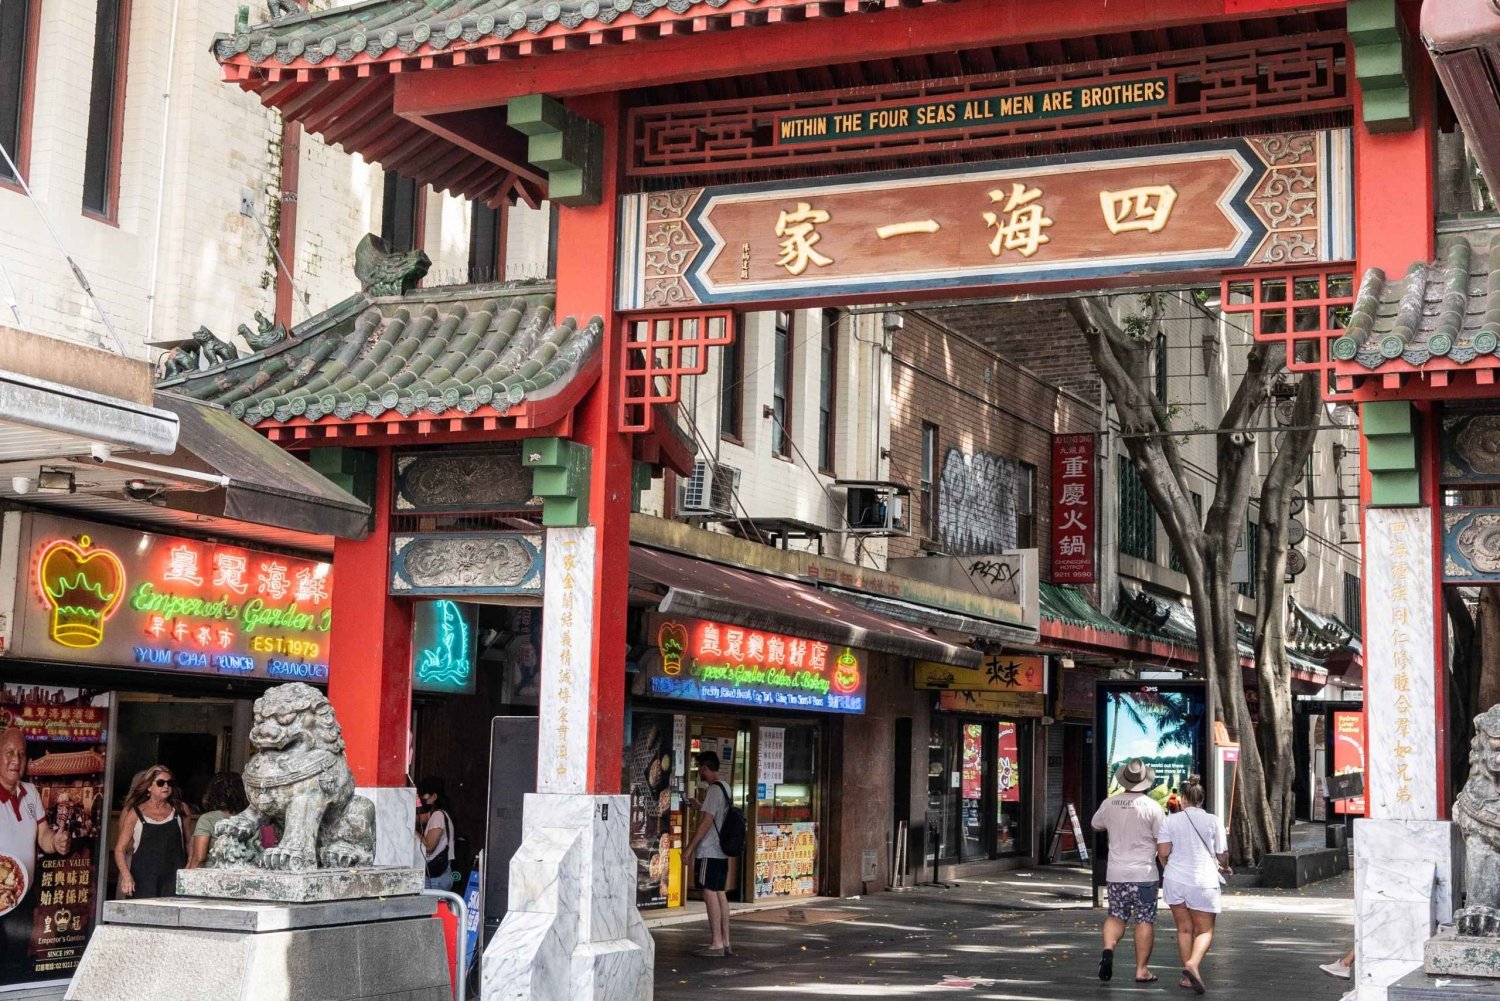 Sydney: Chinatown Street Food & Culture Guided Walking Tour